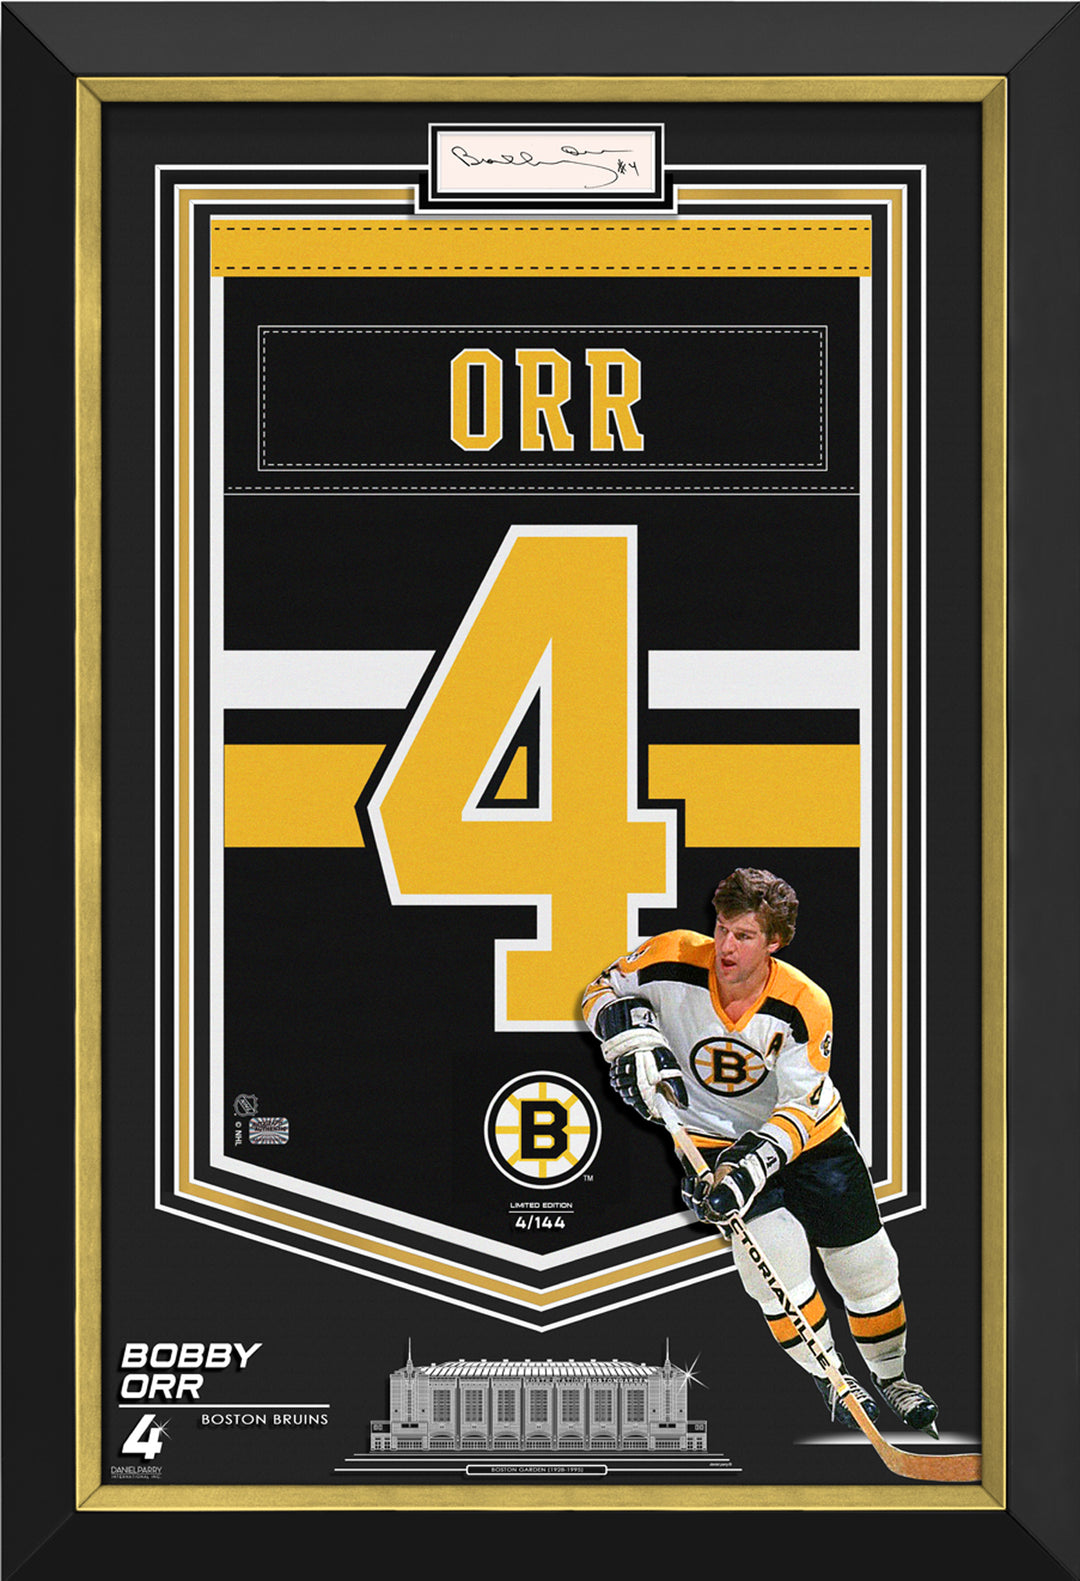 Bobby Orr Framed Arena Banner Limited Edition 4/144 Bruins, Cut Signature, Boston Bruins, NHL, Hockey, Autographed, Signed, AAABH32595